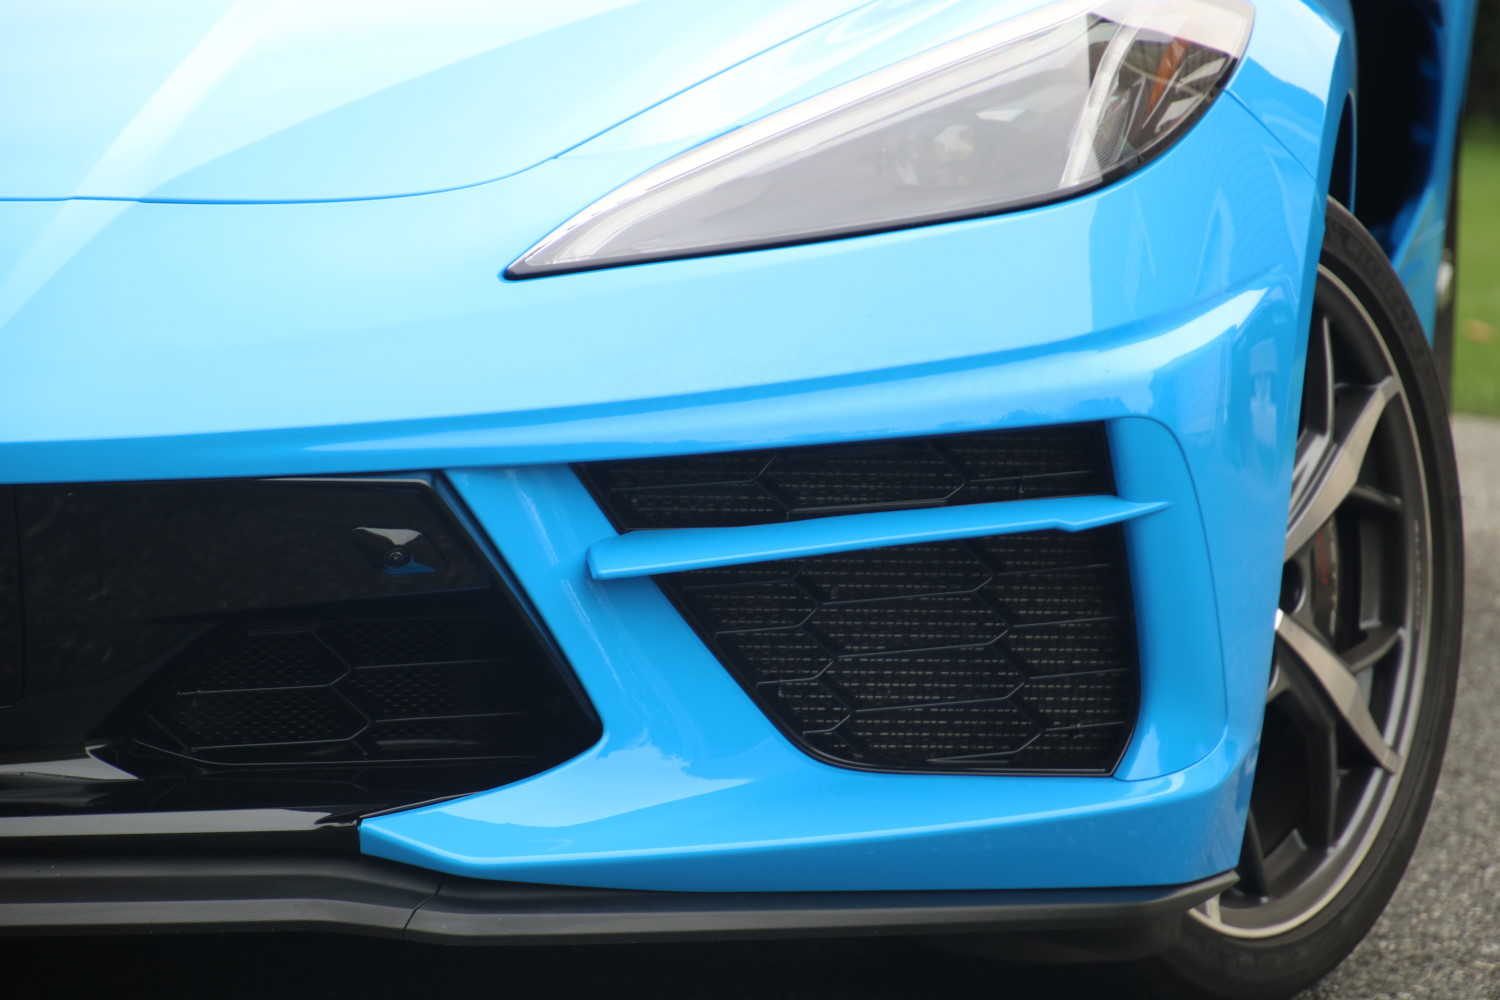 Stylish and Practical: Upgrading Your C8 Corvette with Radiator Grille Guards